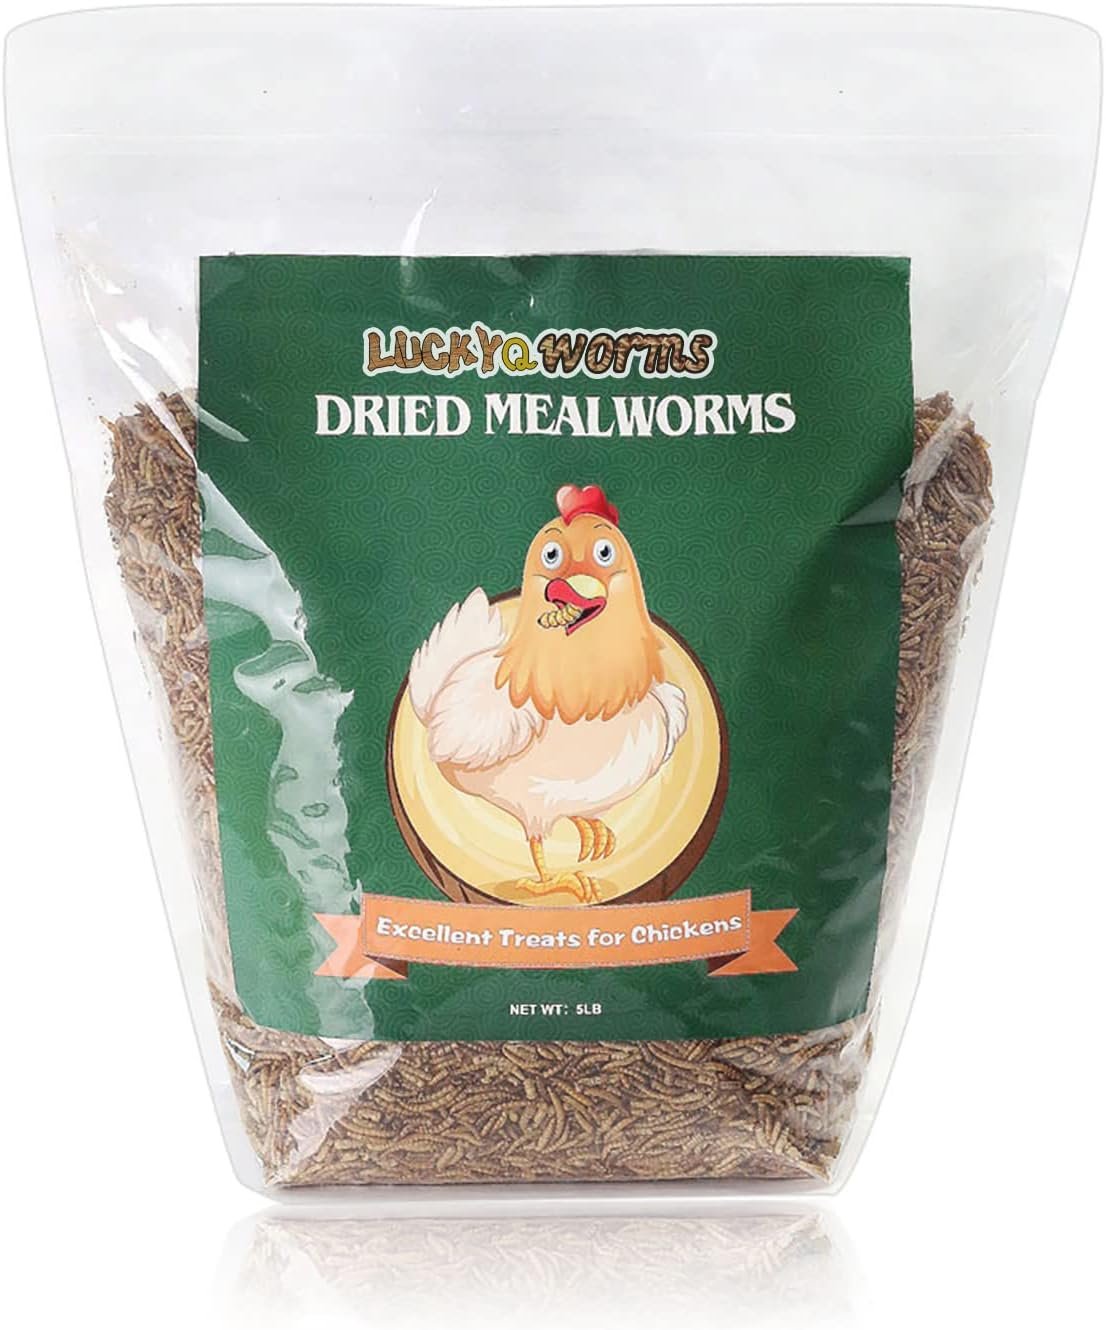 LuckyQworms Dried Mealworms 5Lbs, High-Protein Bulk Mealworms, 100% Non-GMO Mealworm Treats for Birds, Chickens, Turtles, Fish, Hamsters and Hedgehogs All Natural Animal Feed